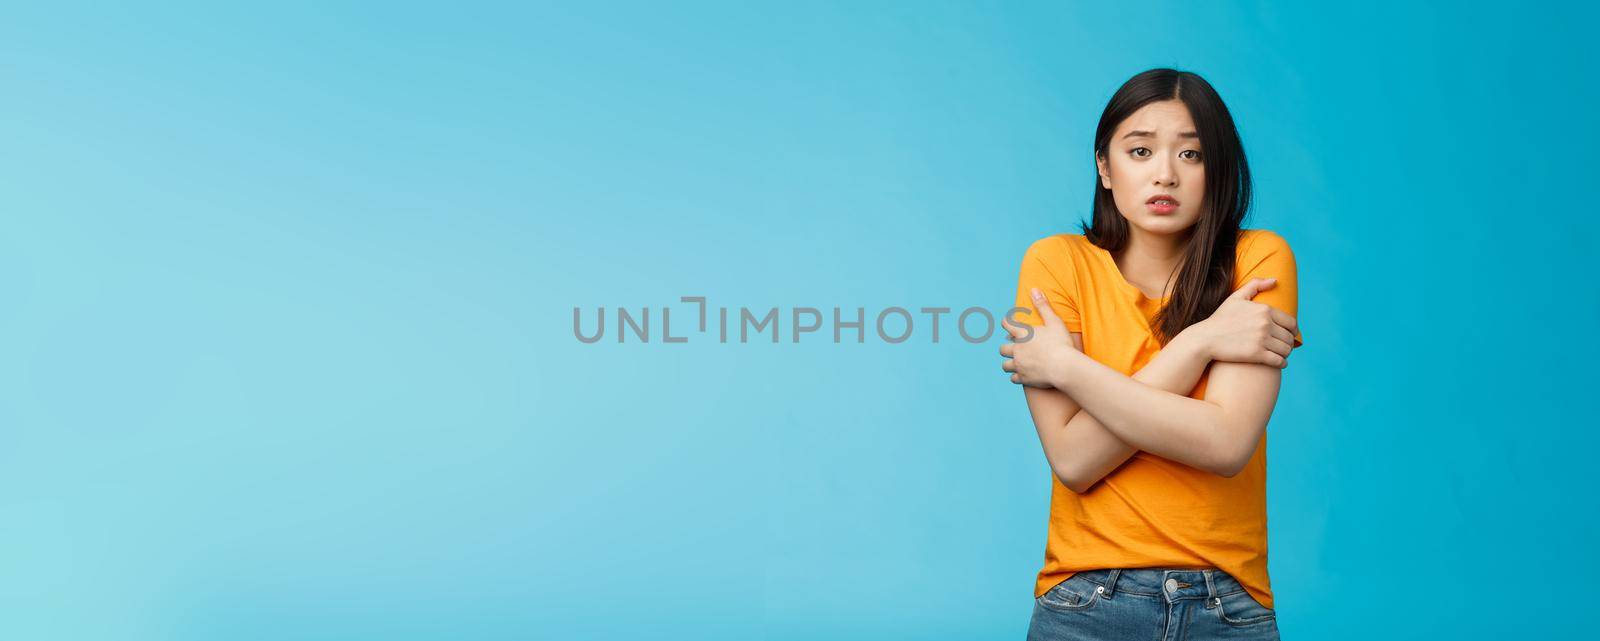 Girl feeling uncomfortable walking light yellow t-shirt, hugging herself trembling, shaking feeling cold, freezing windy weather, frowning grimacing discomfort, stand blue background.